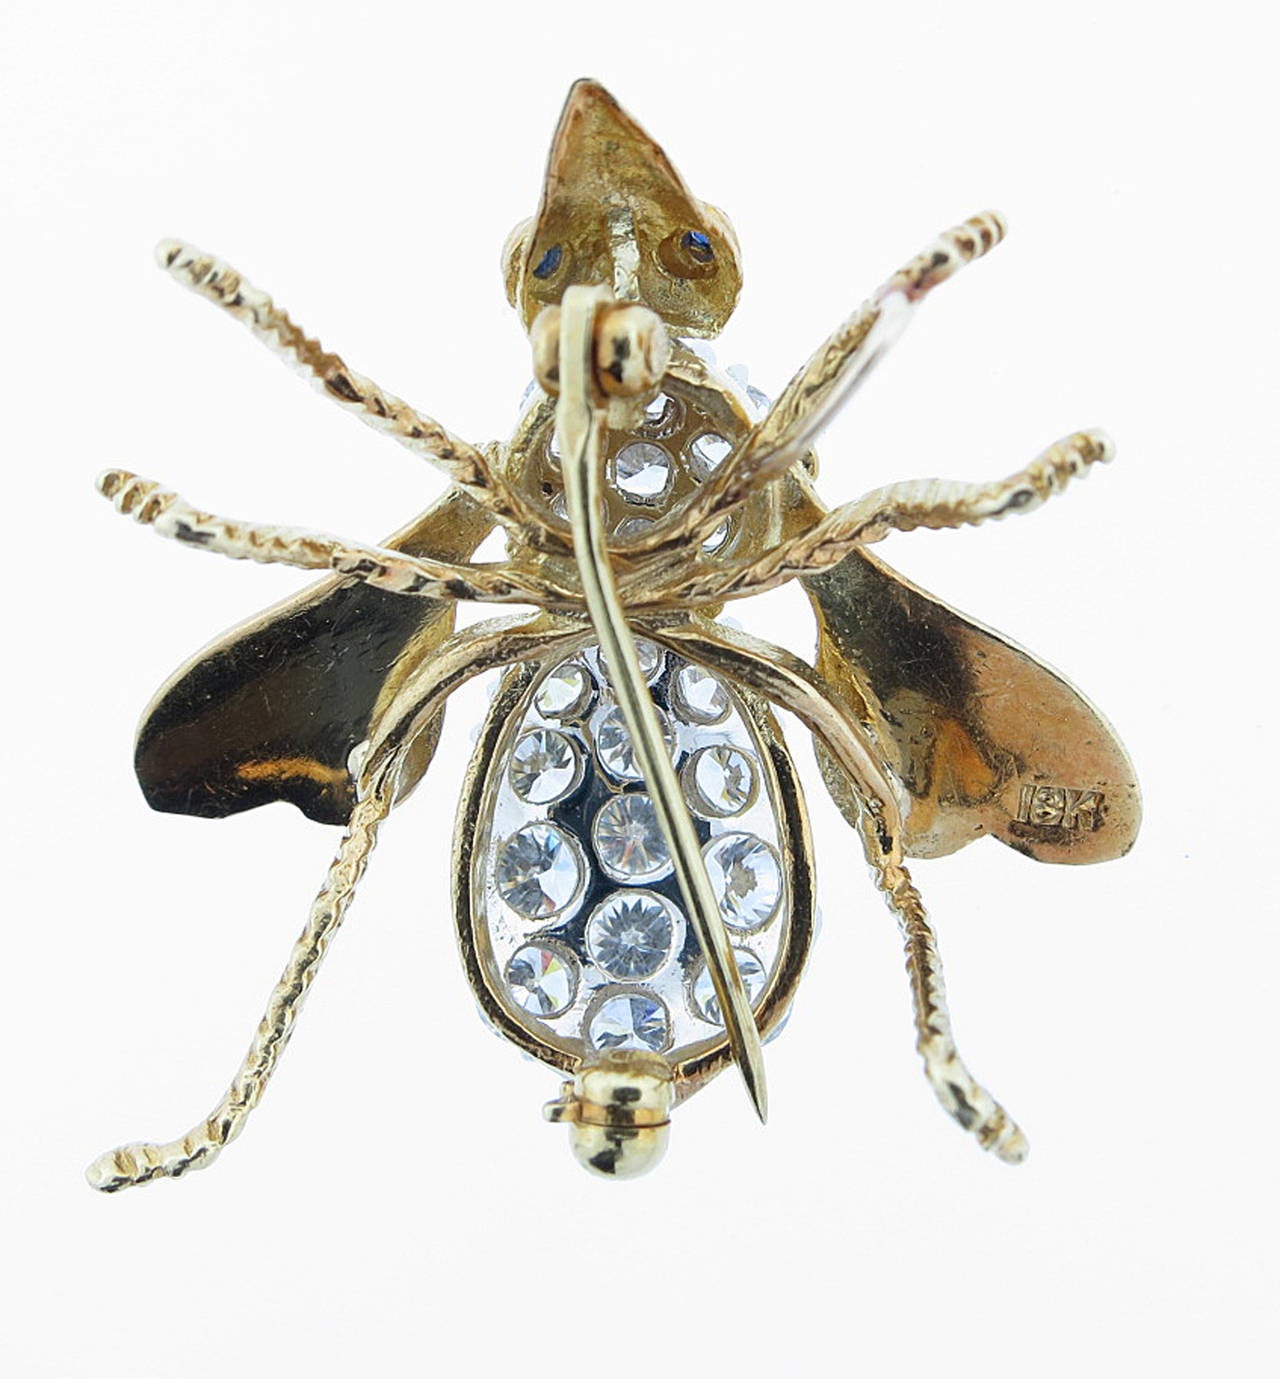 18kt. yellow and white gold bee in a dimensional engraved mount on the front and back. The body of the bee is prong set in white gold with 20 round extremely fine round brilliant cut diamonds totaling approx. 2.5cts. with faceted sapphire eyes. The